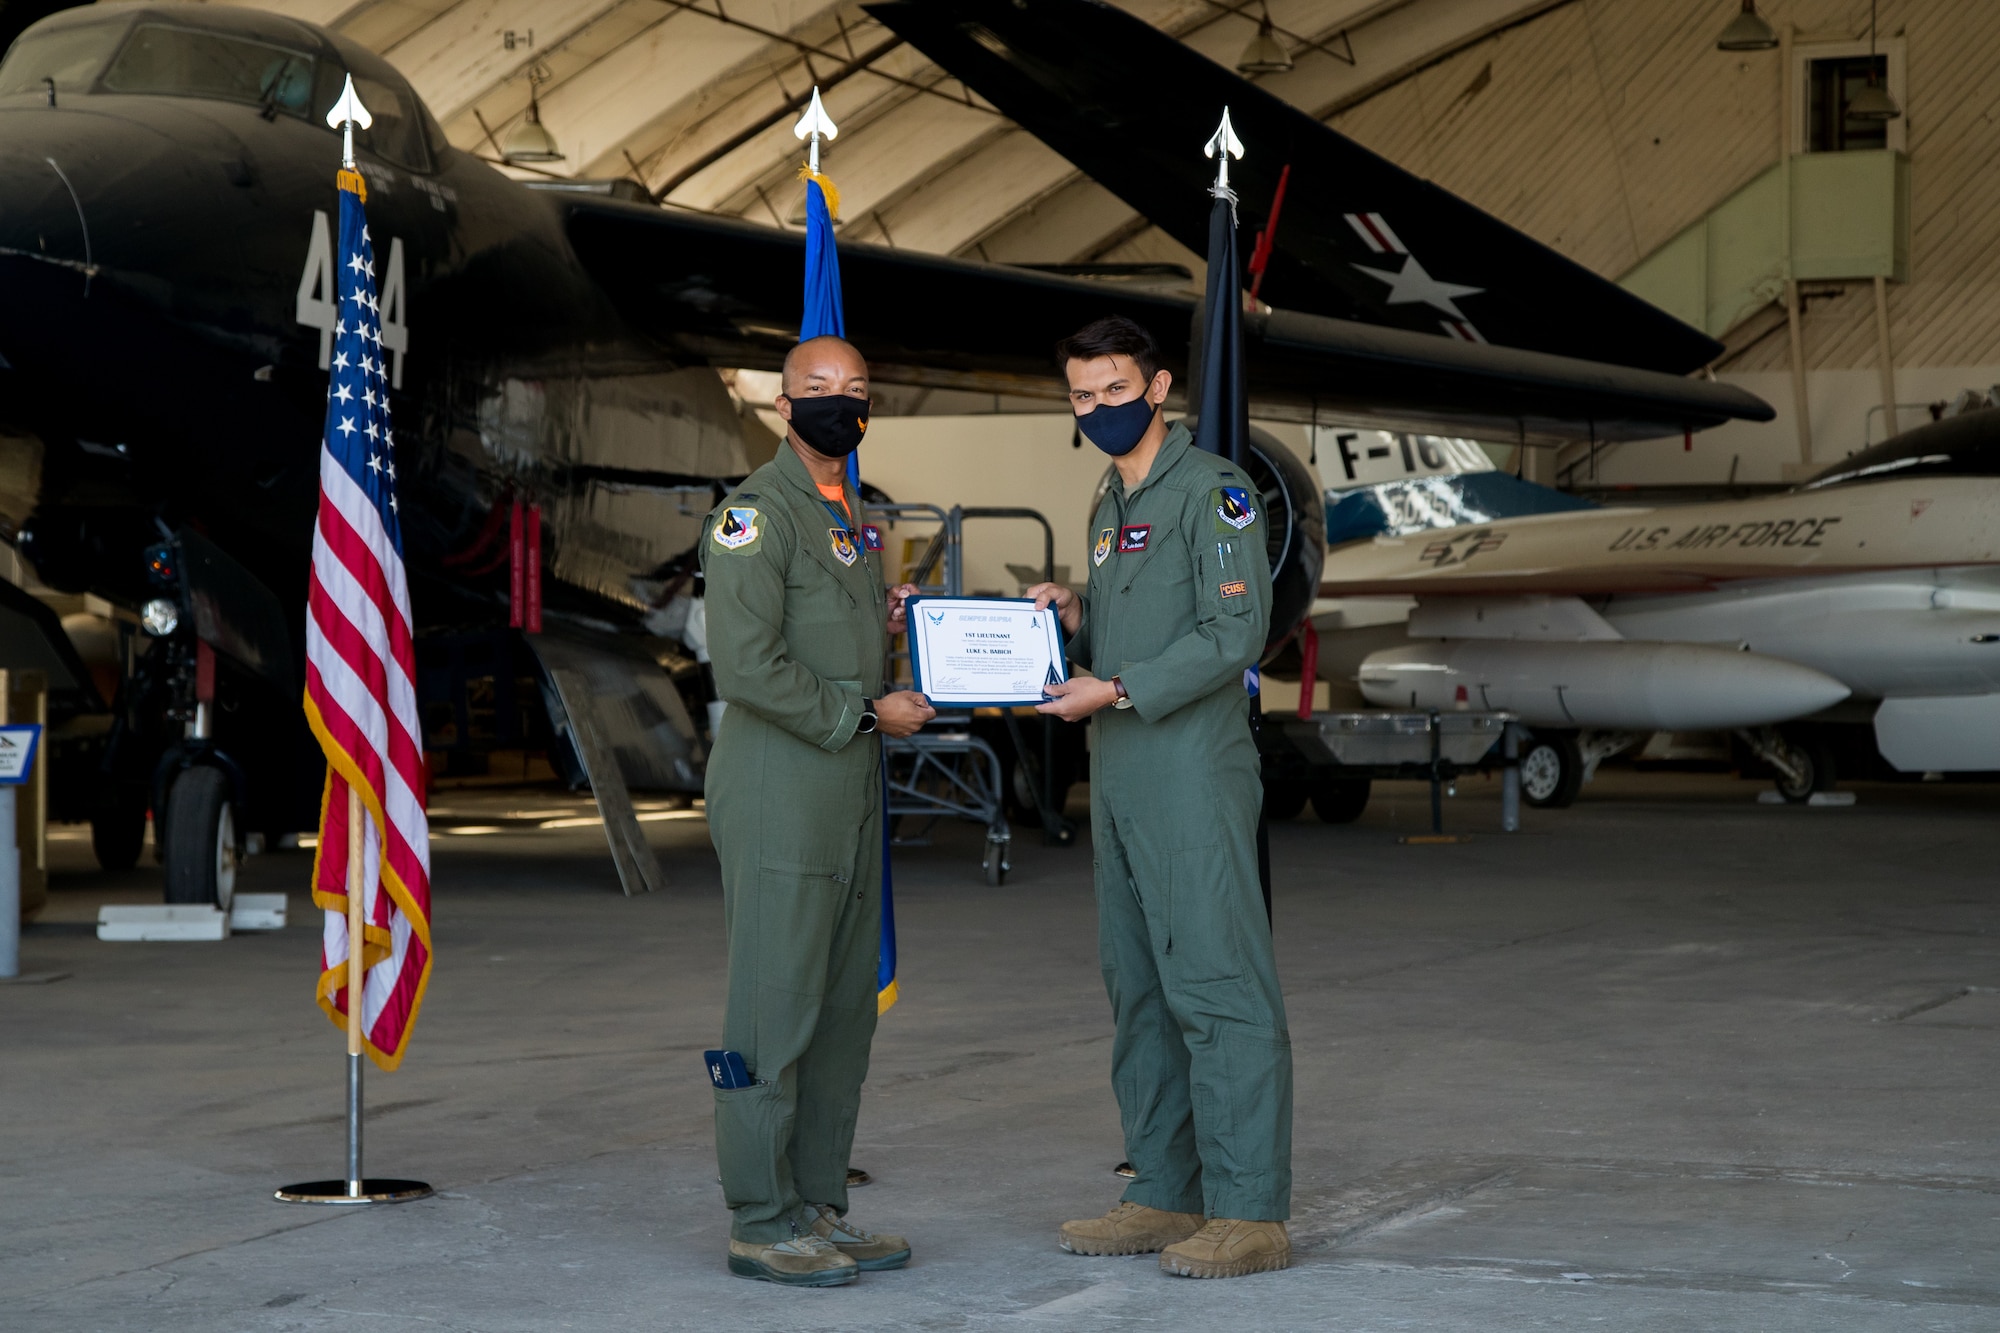 1st Lt. Luke Babich, 418th Flight Test Squadron, originally of Dix Hills, New York, accepts his U.S. Space Force certificate from Col. Randel Gordon, 412th Test Wing Vice Commander, during a Space Force Transfer Ceremony at Edwards Air Force Base, California, Feb. 11. (Air Force photo by Richard Gonzales)